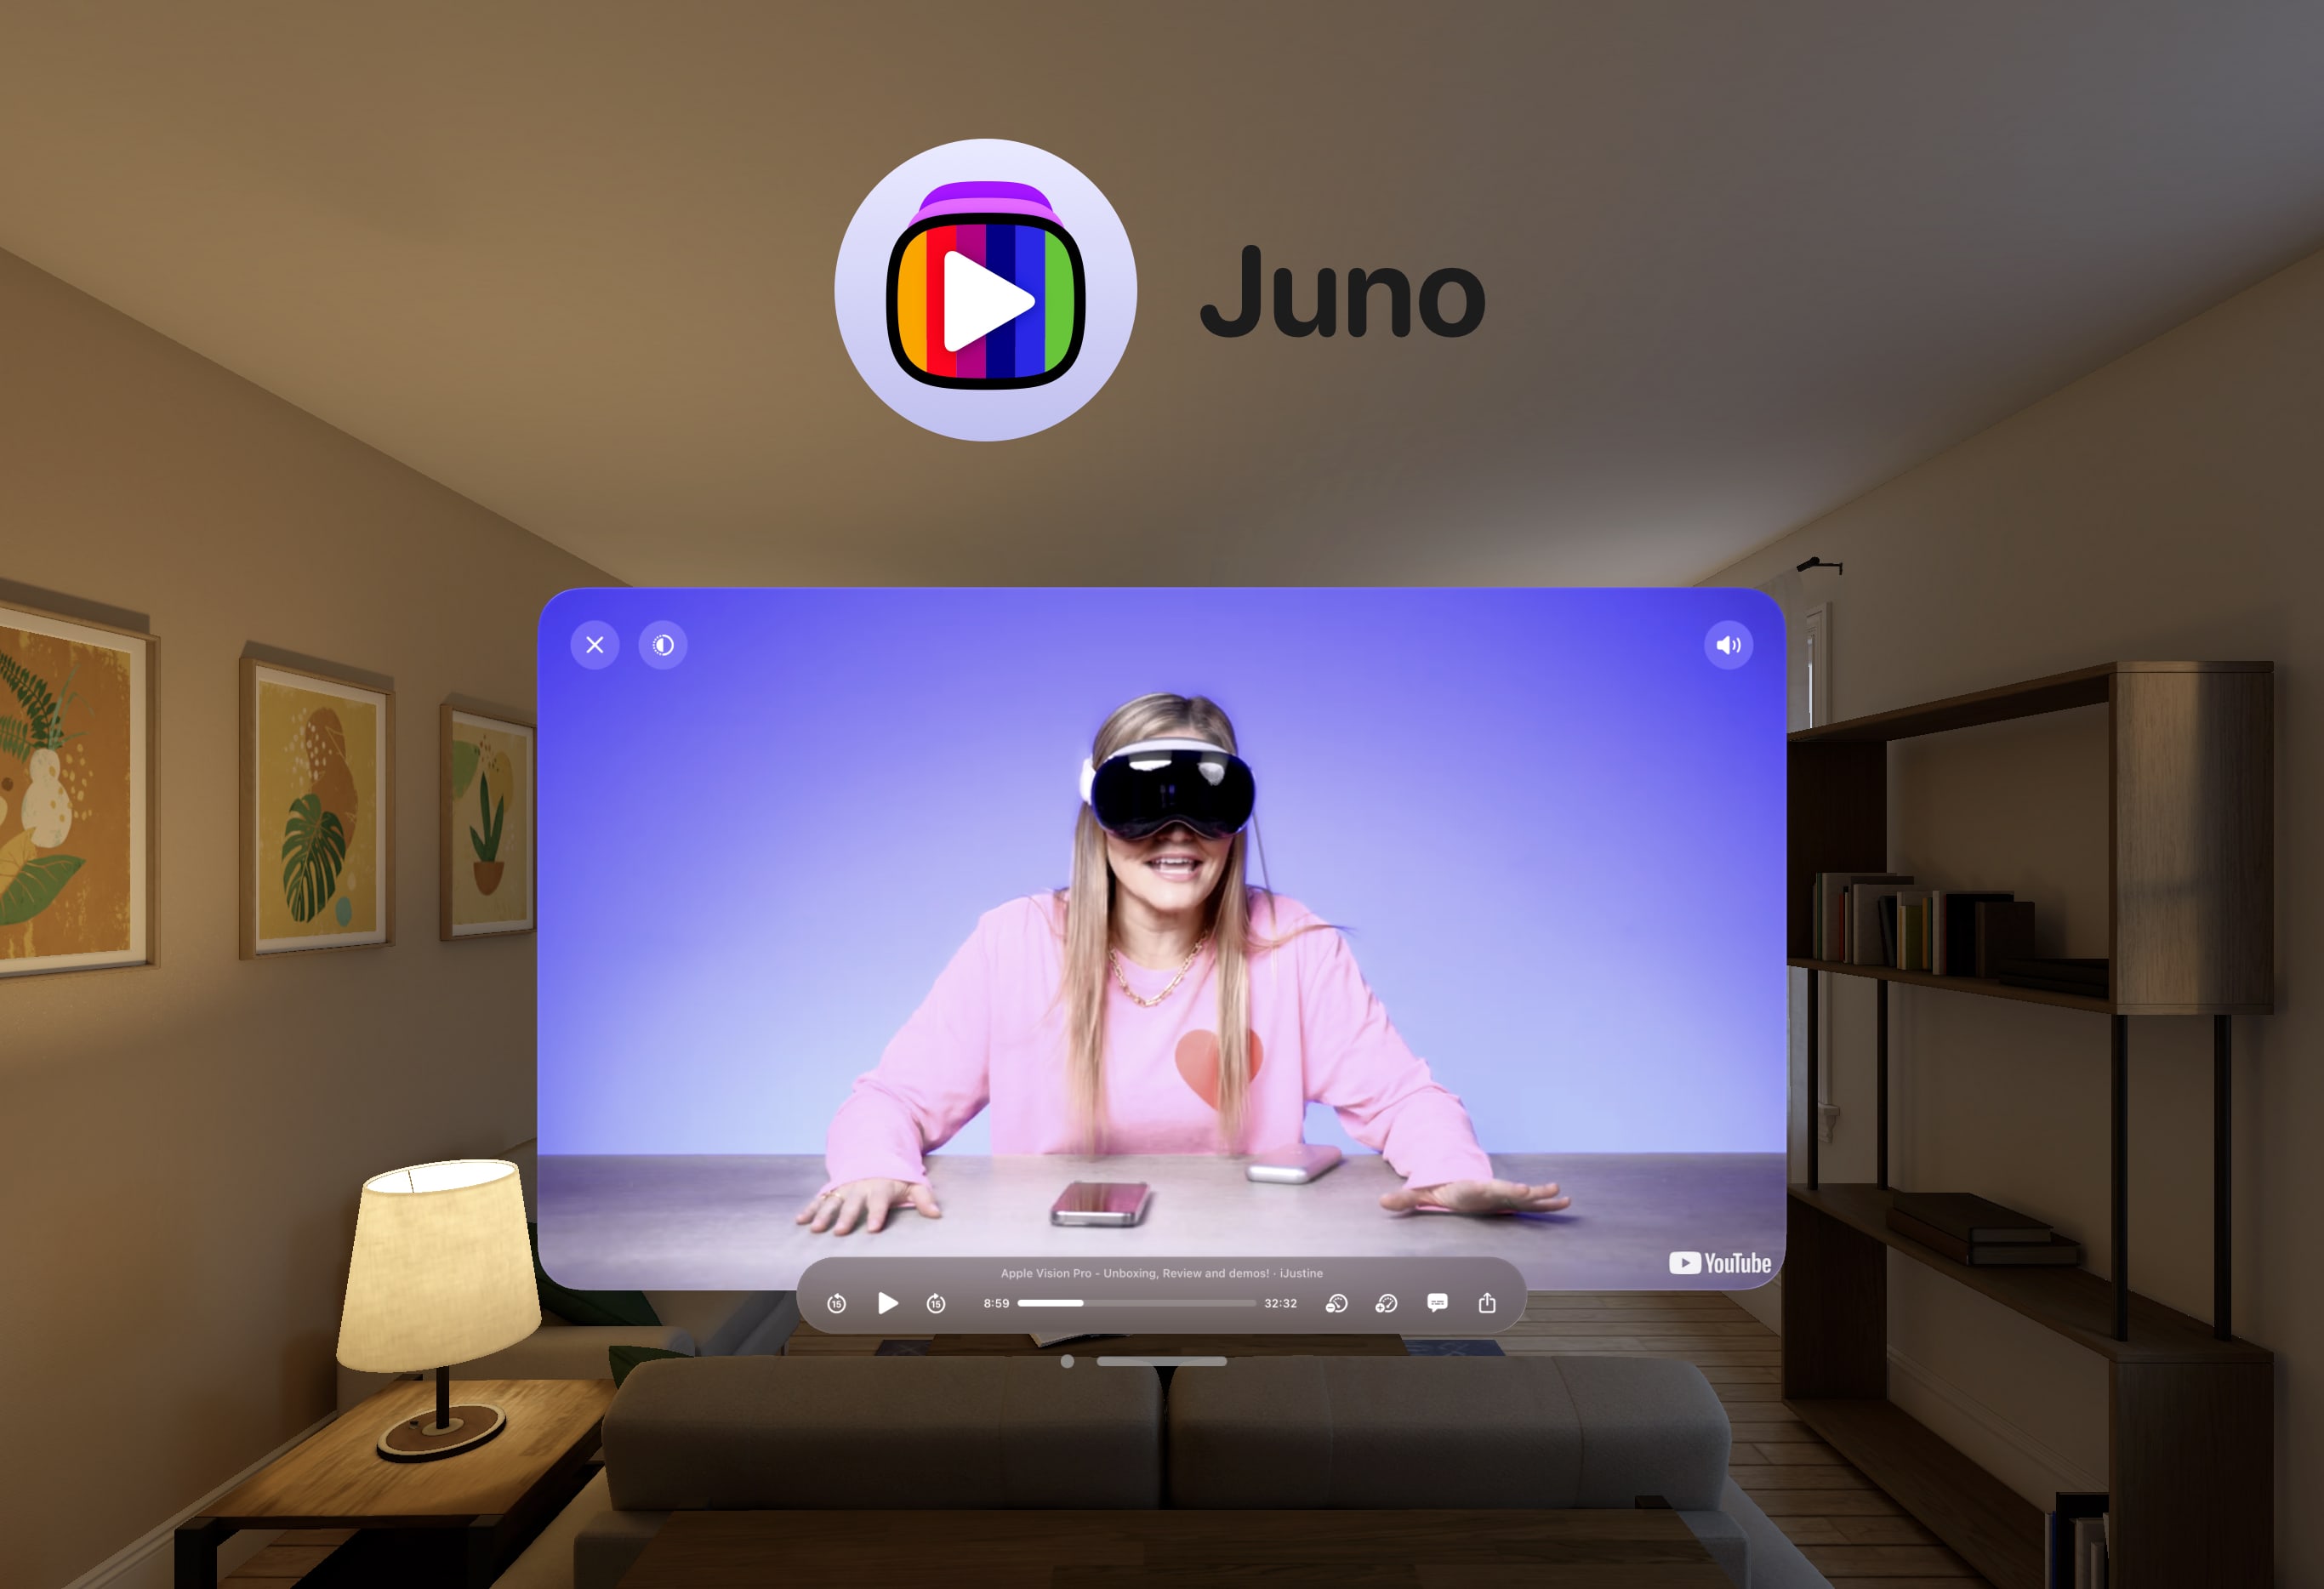 Apple Vision Pro view of a living room with a floating window showing an iJustine video with the Juno app icon floating above it